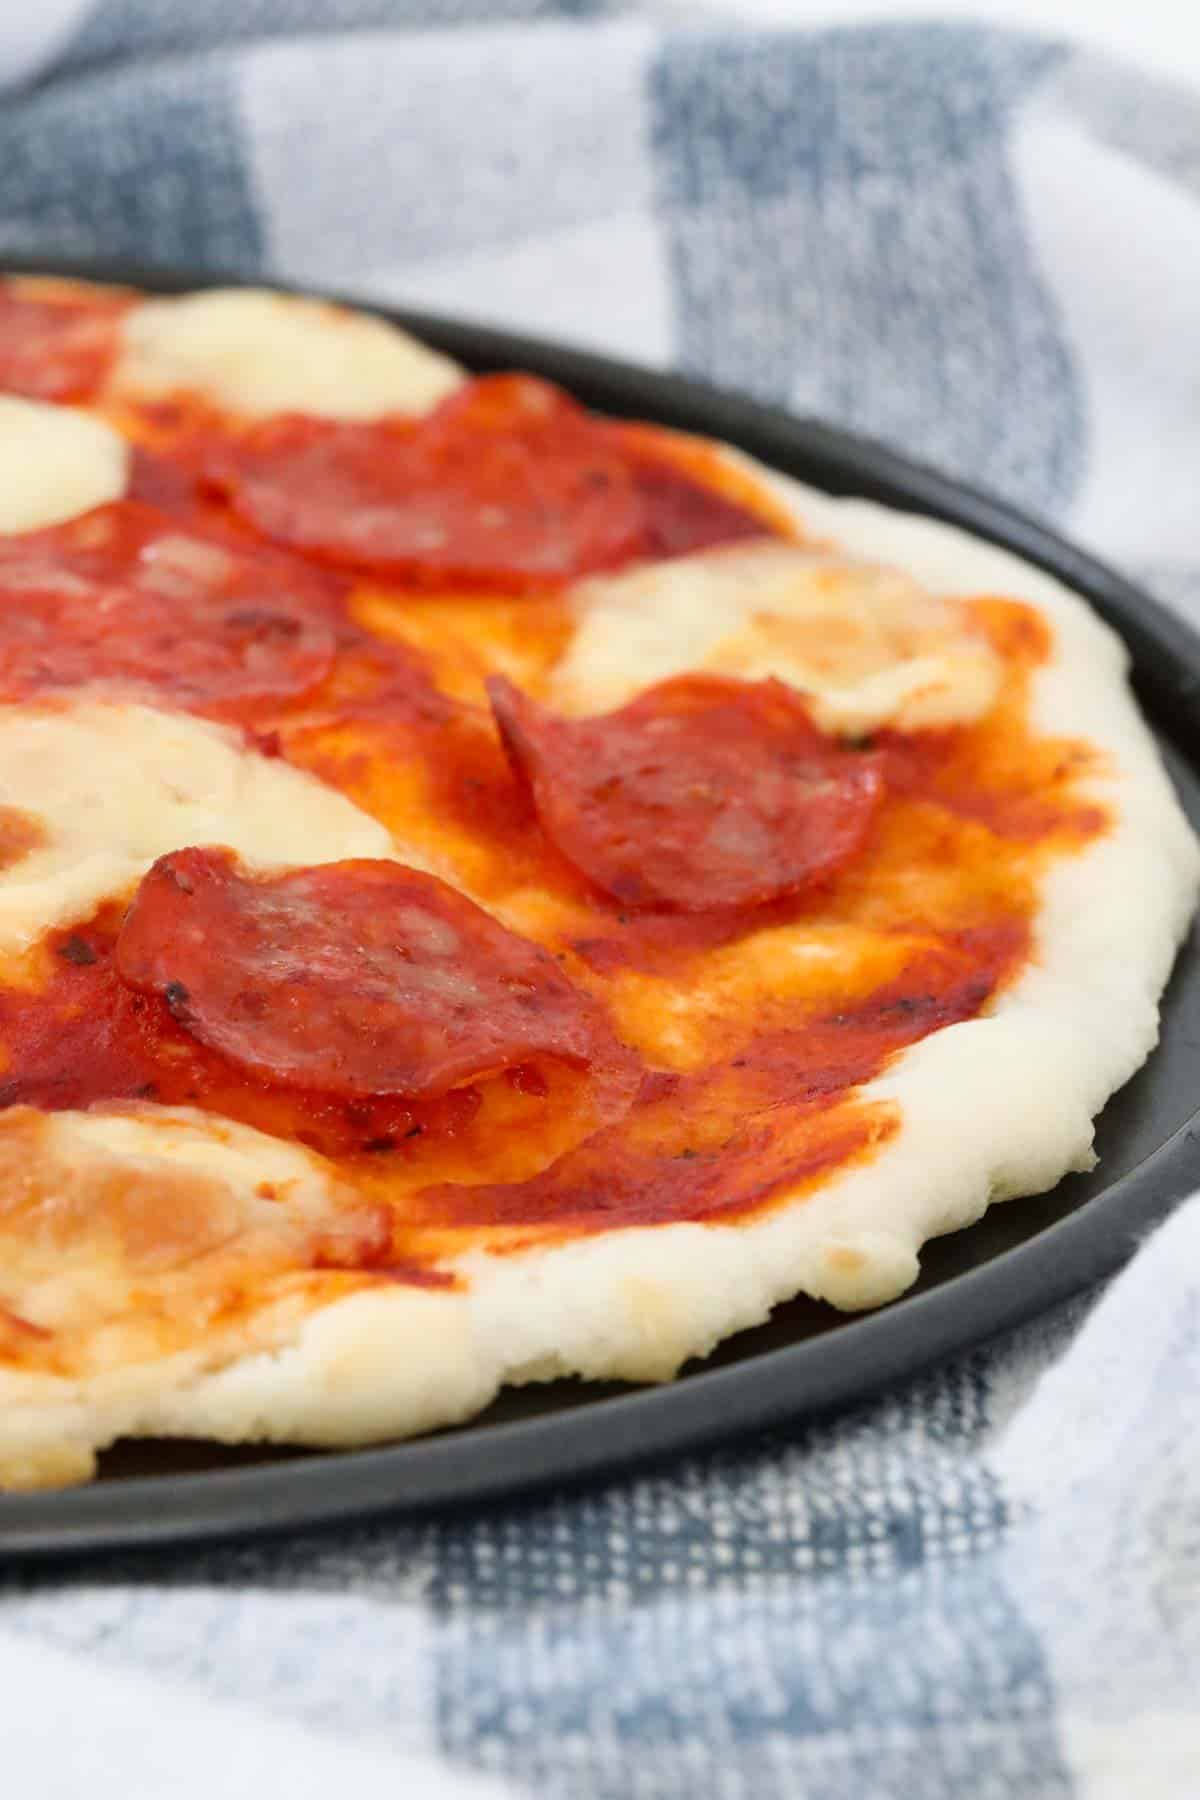 A gluten free pizza with pepperoni and cheese.